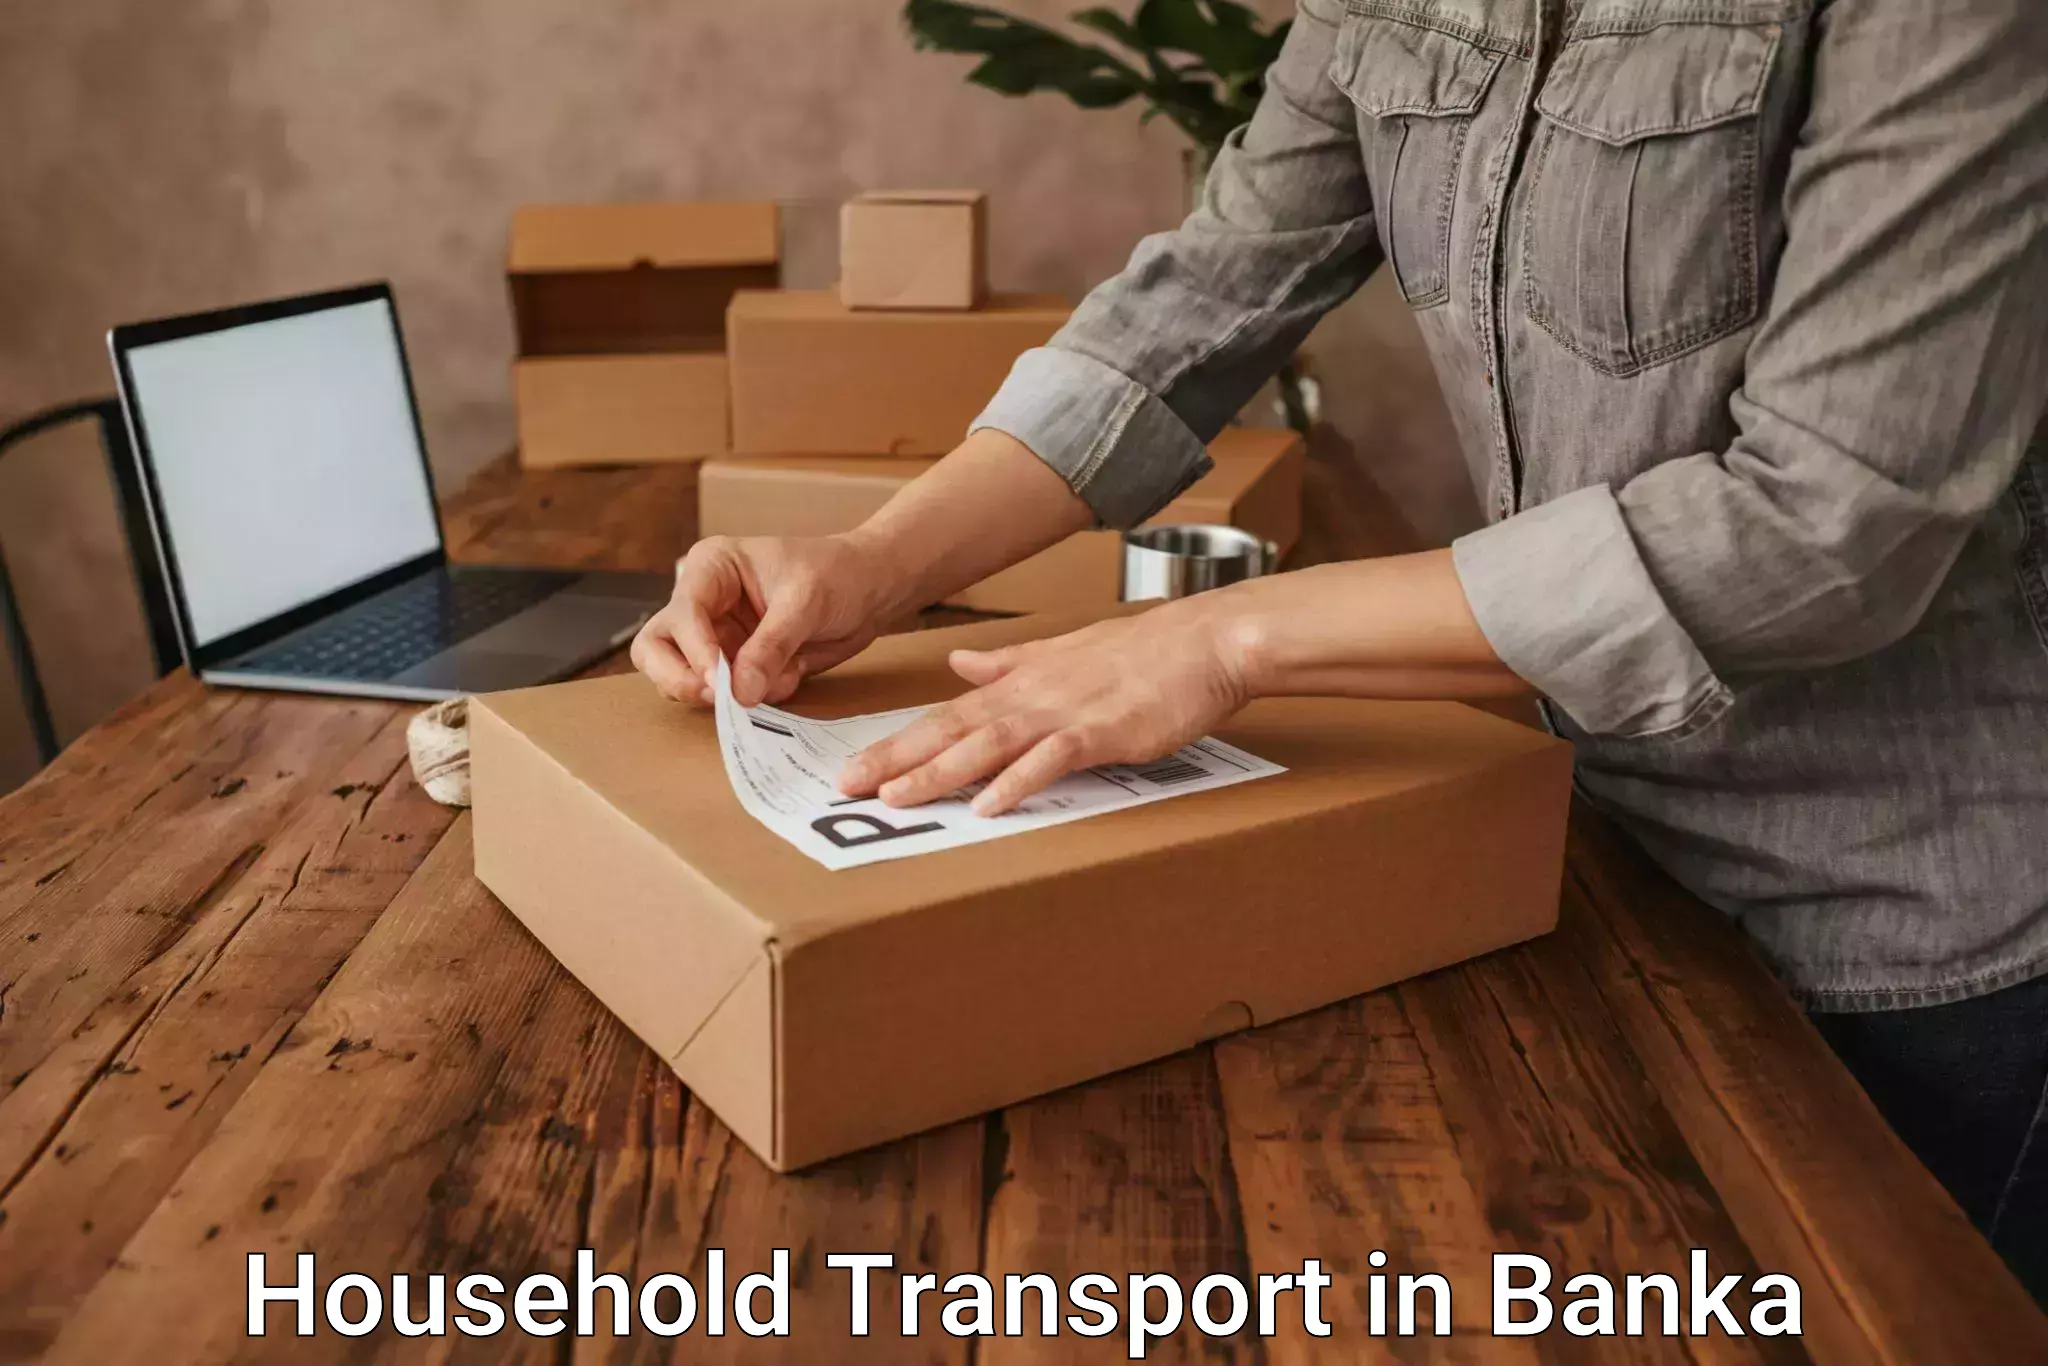 Reliable furniture transport in Banka